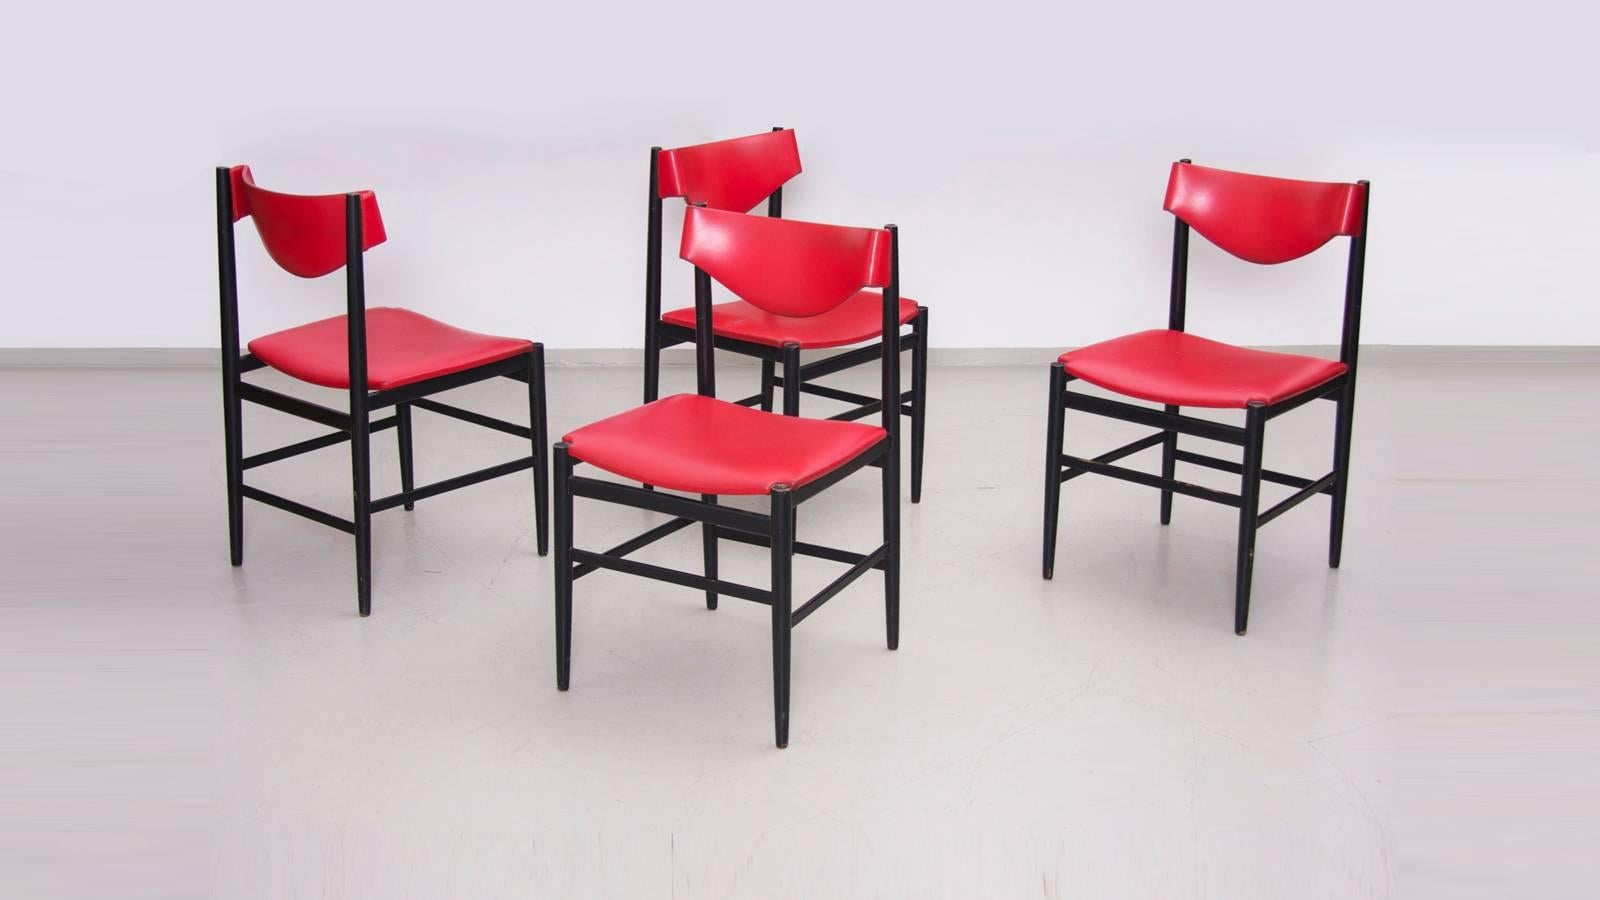 Rare vintage set of four chairs by Gianfranco Frattini for Cassina. Marvellous round shape of the back rest, fully covered in red artificial leather. Lacquered black frame really close to Leggera and Superleggera proportions.

